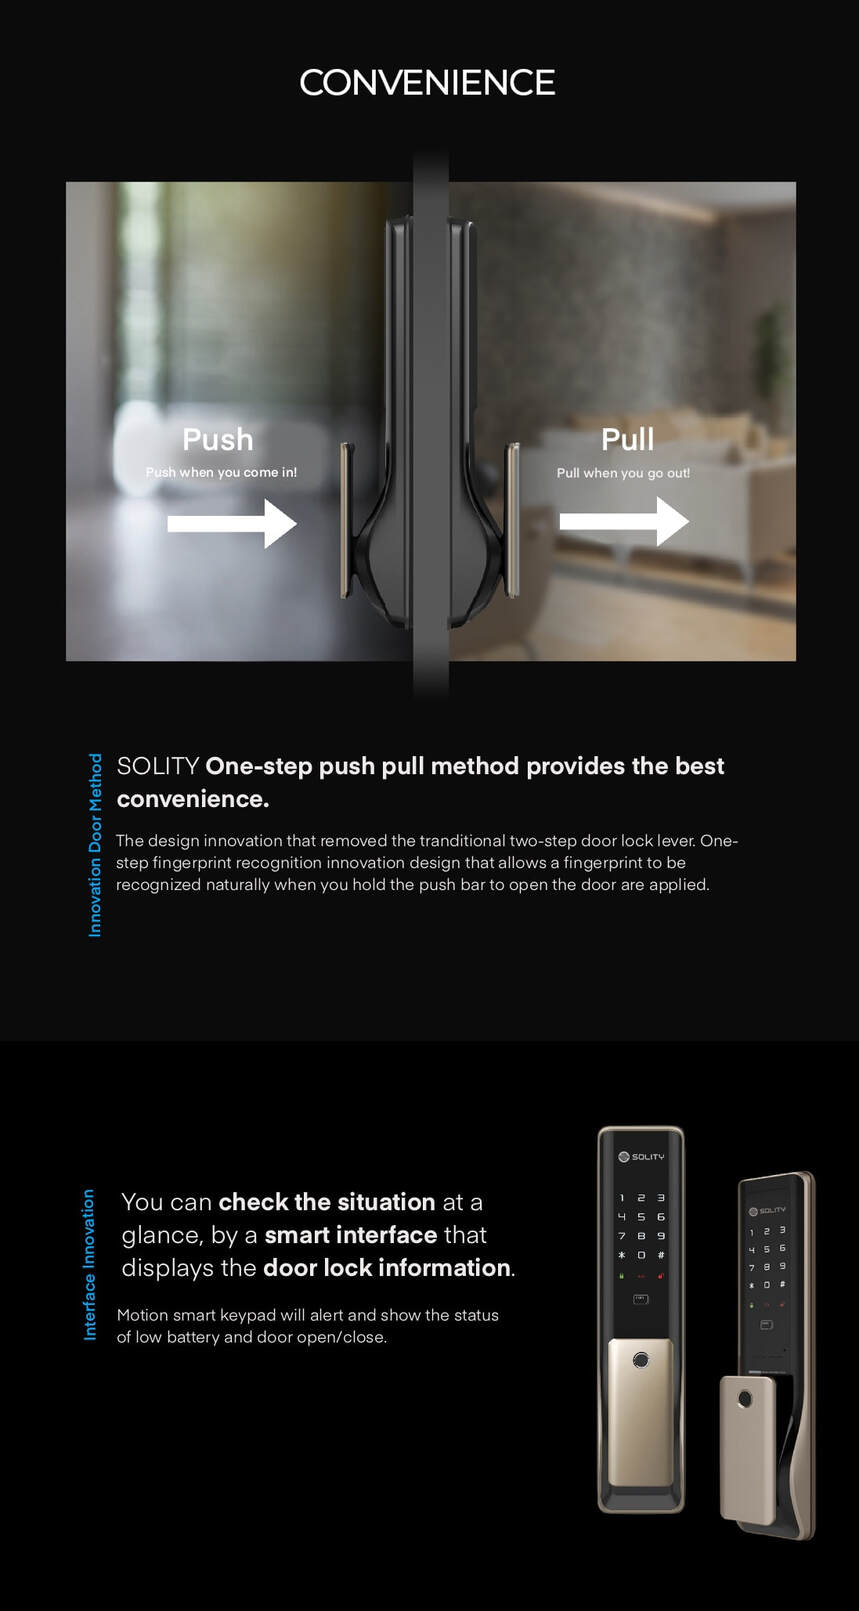 Solity GP-6000BKF One Touch Push Pull Handle Smarrt Door Lock convenience usage from Interlock Singapore